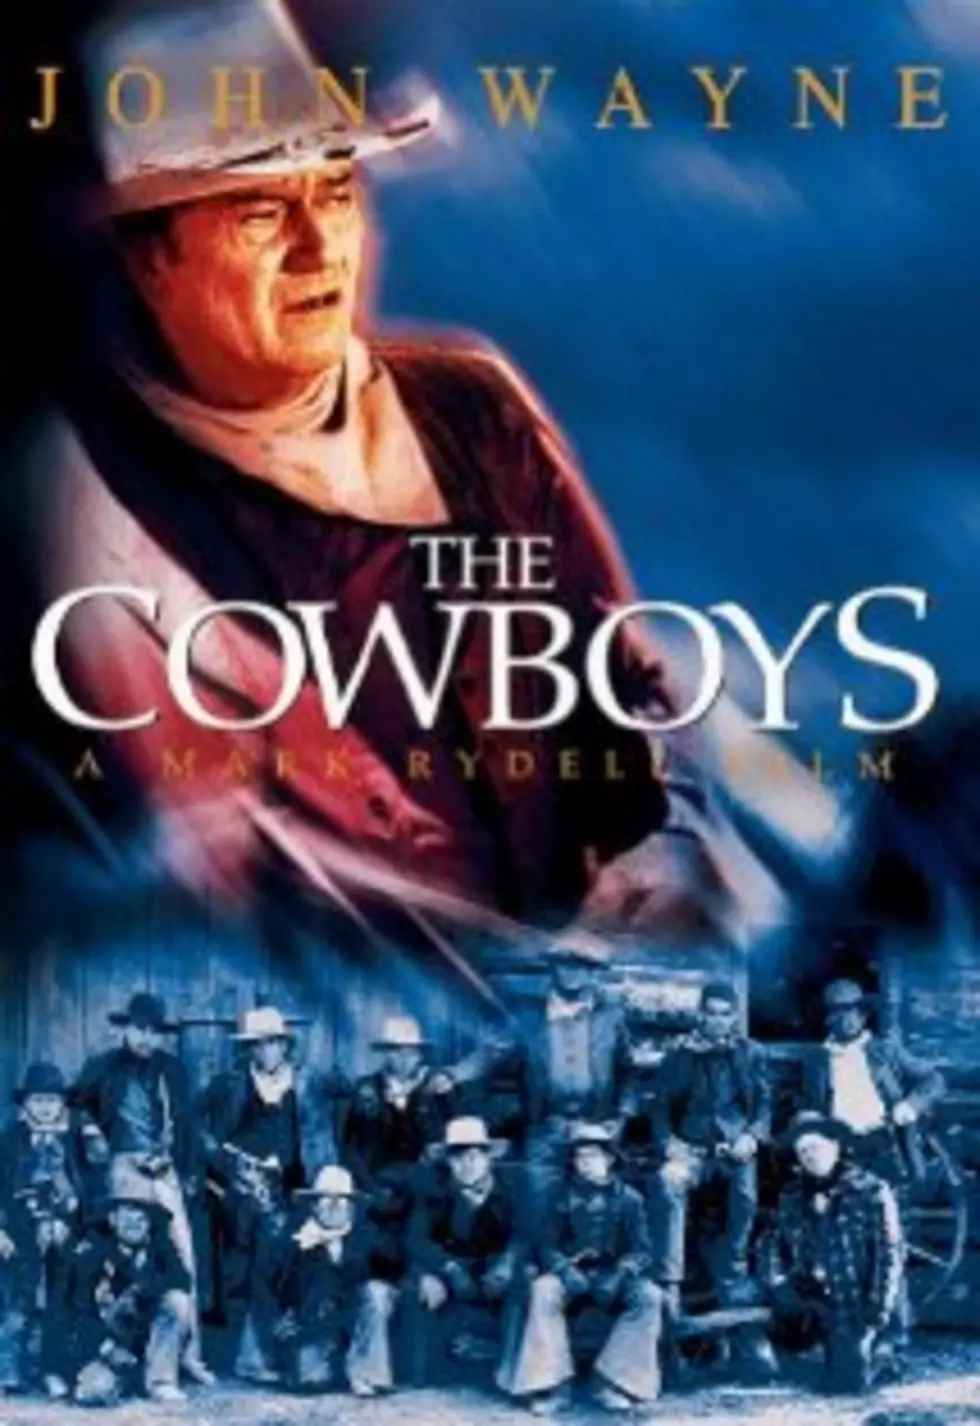 This Week&#8217;s FREE Friday Night Downtown Movie Is &#8220;The Cowboys&#8221;